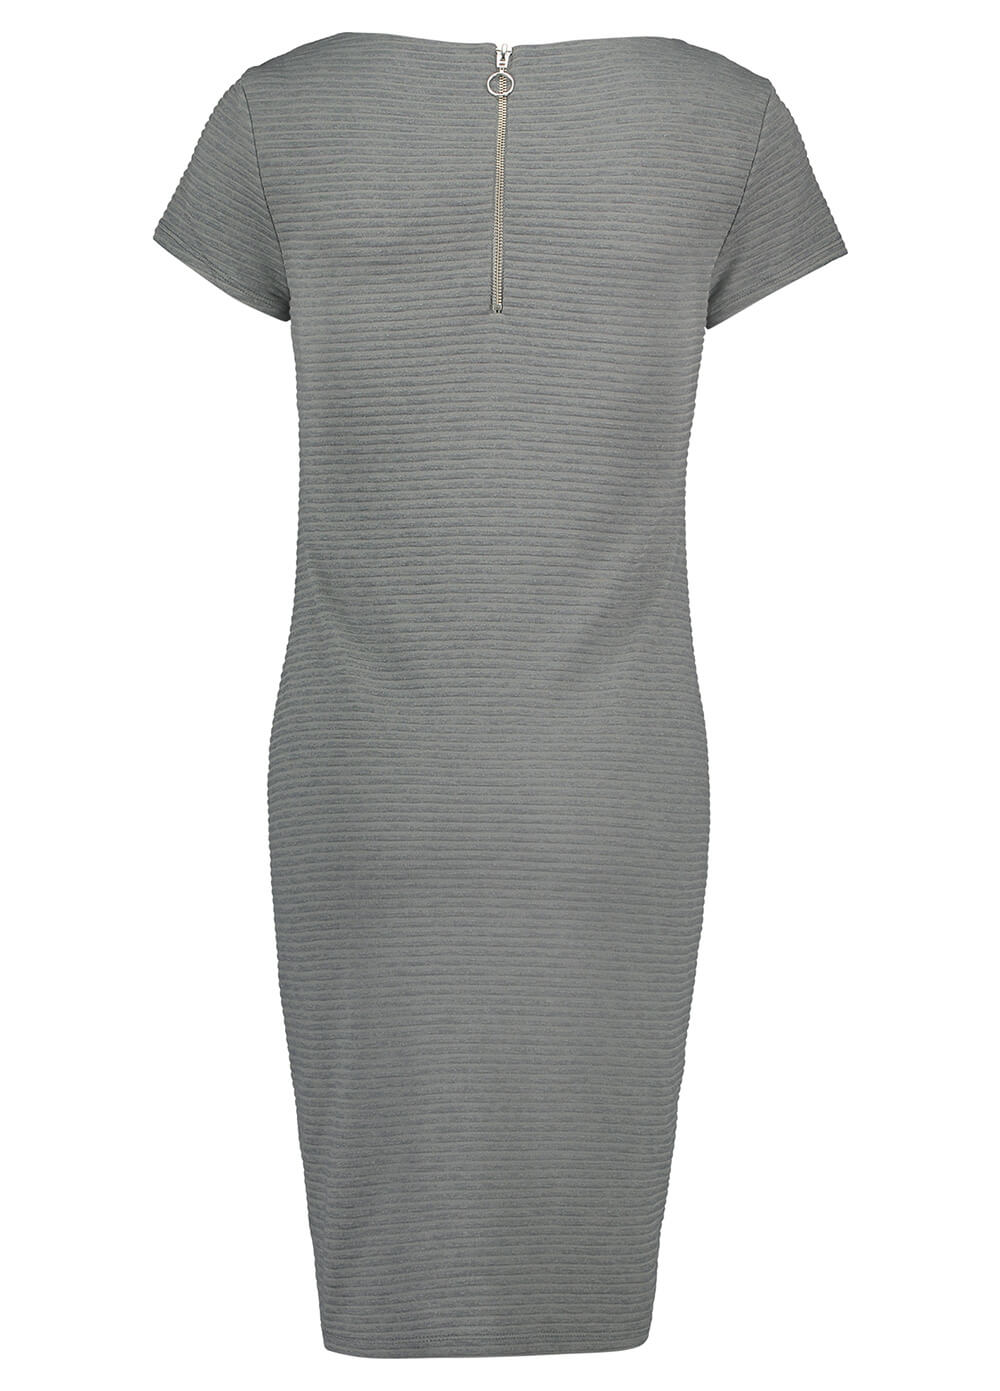 Benja Maternity Dress in Army by Noppies